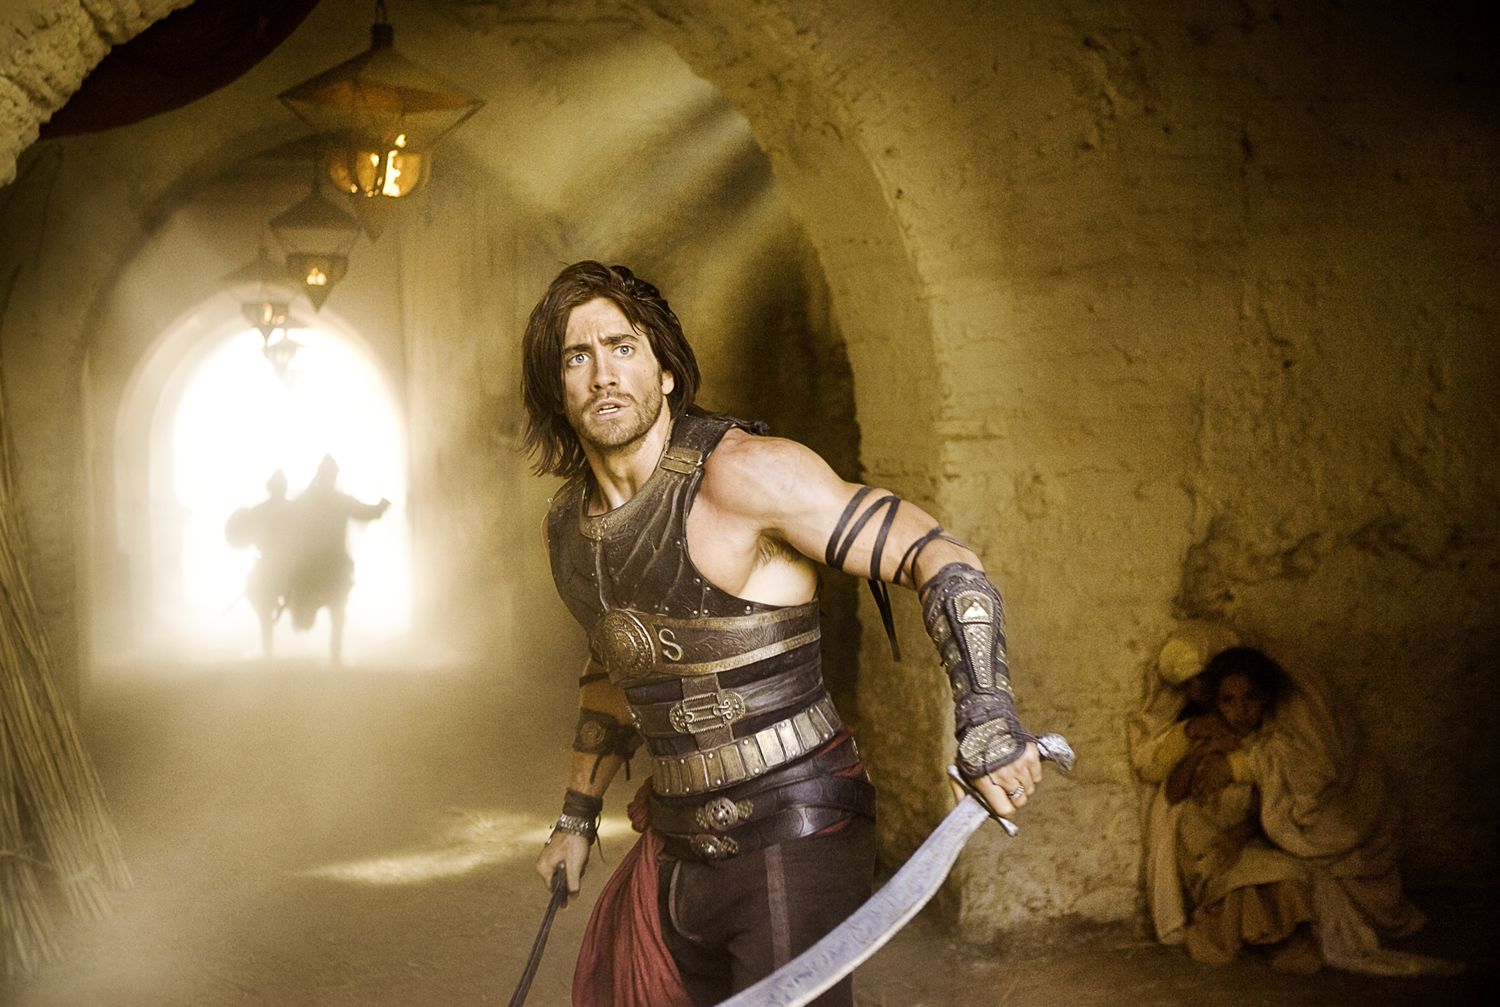 Jake Gyllenhaal, playing Prince Dastan in Jerry Bruckheimer's epic Prince of Persia: Sands of Time